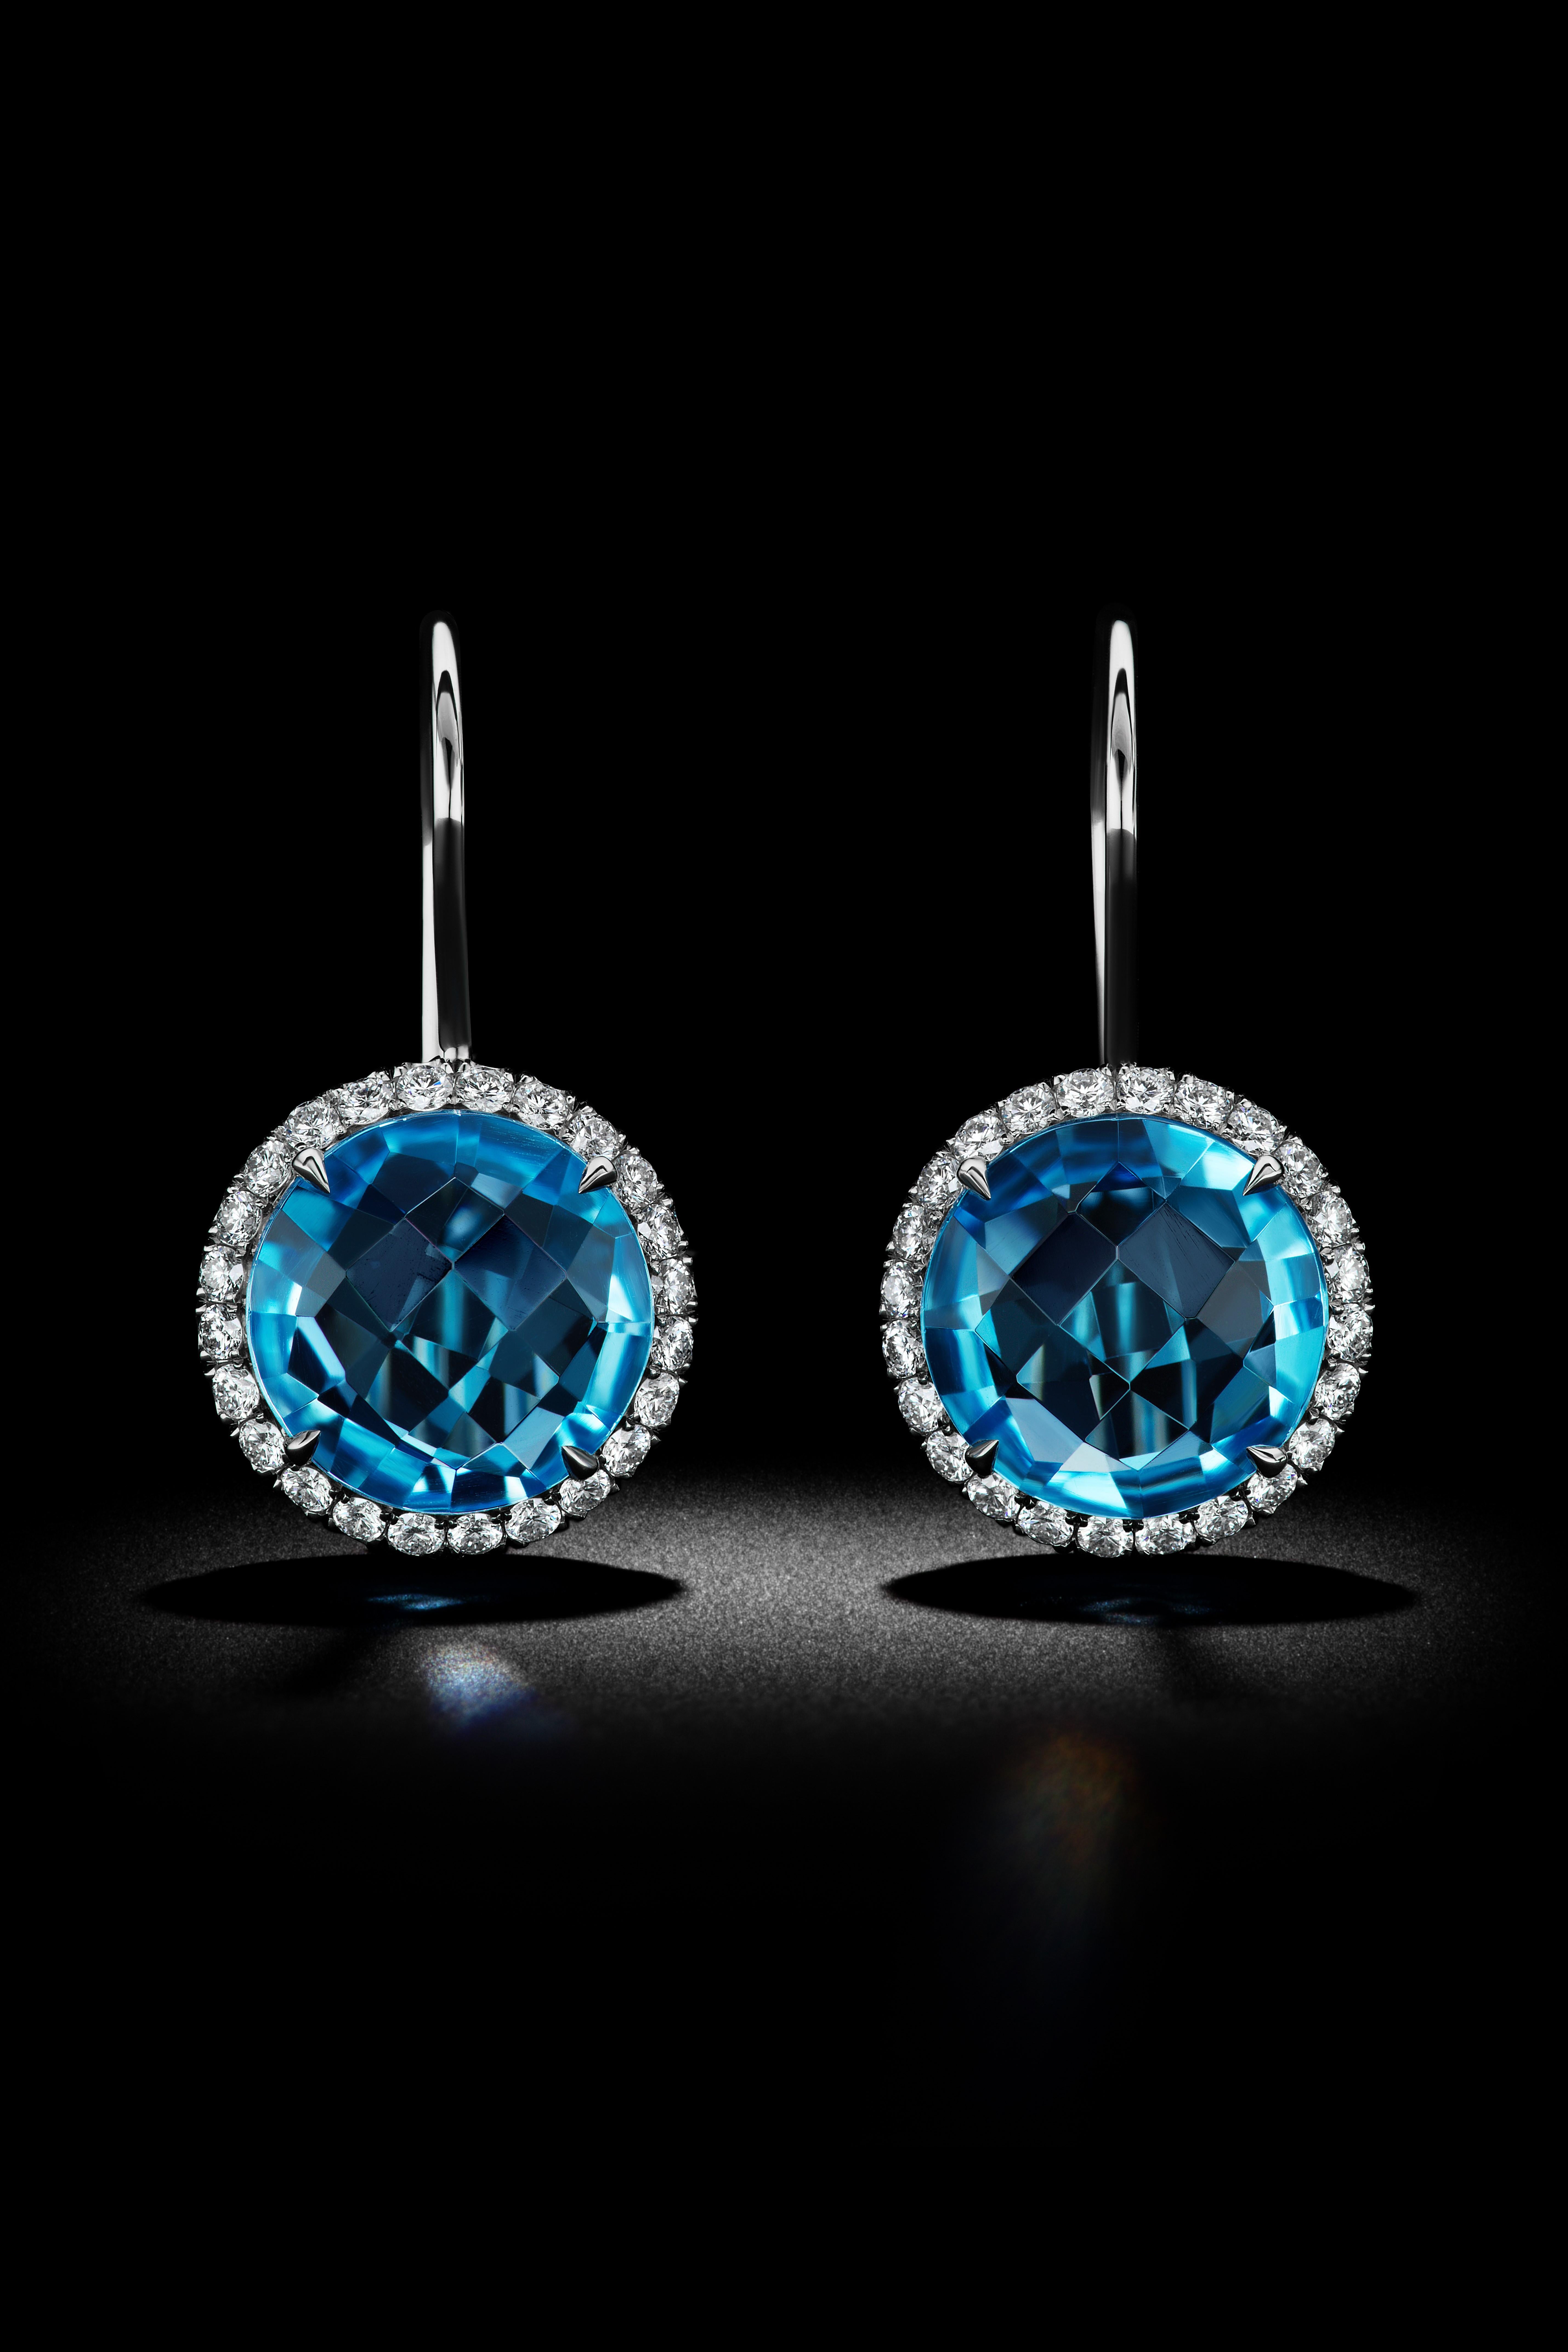 Simply stunning Blue Topaz Earrings surrounded by a Diamond Halo made in Platinum with 96 diamonds and 7.30 carats of Blue Topaz. 